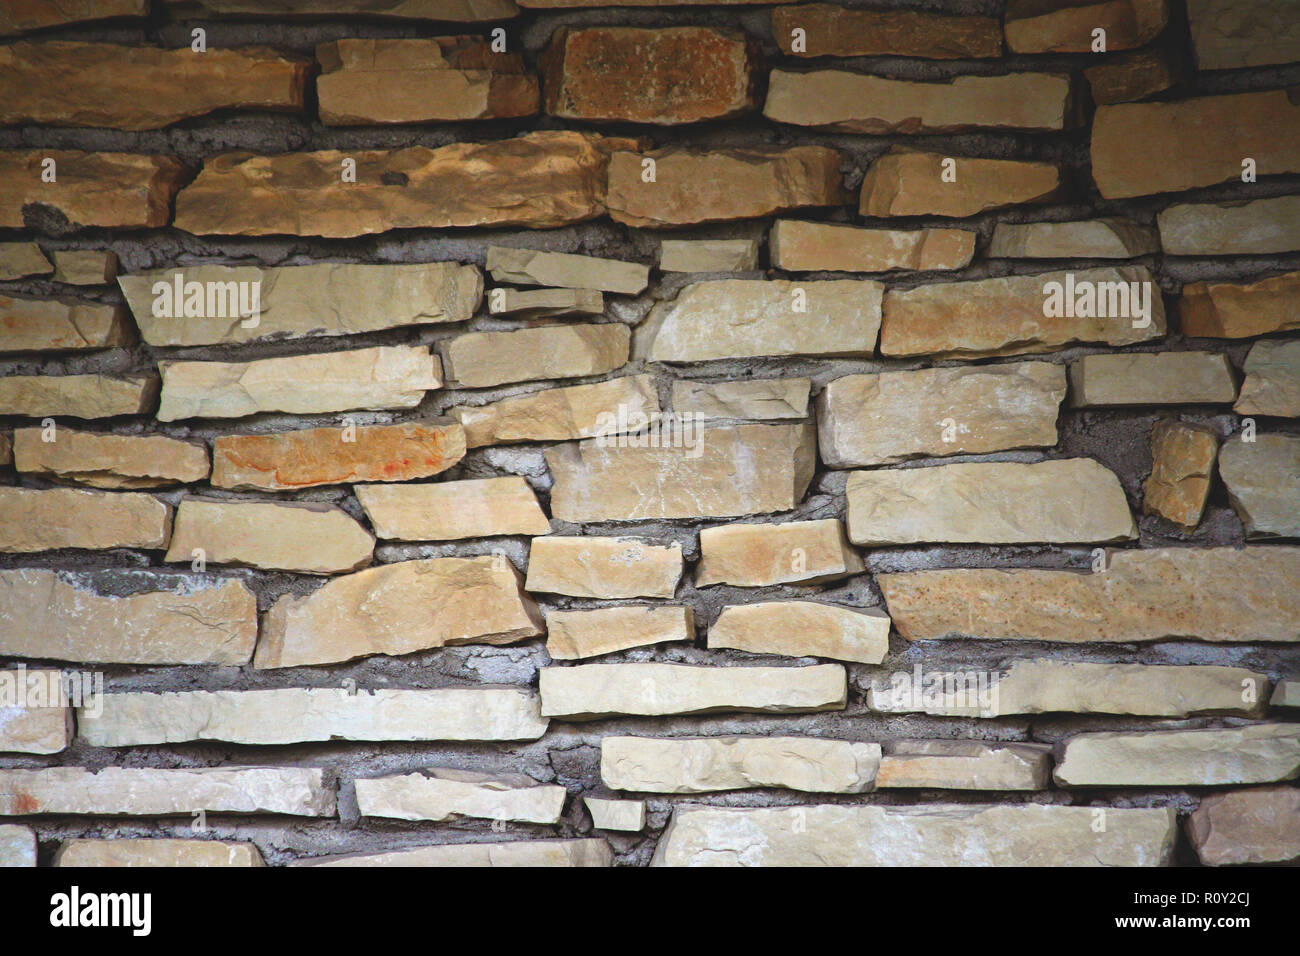 part of the wall is made up of individual pieces of stones in cement, the dark upper part is gradually lighter down, yellow and brown shades, Stock Photo